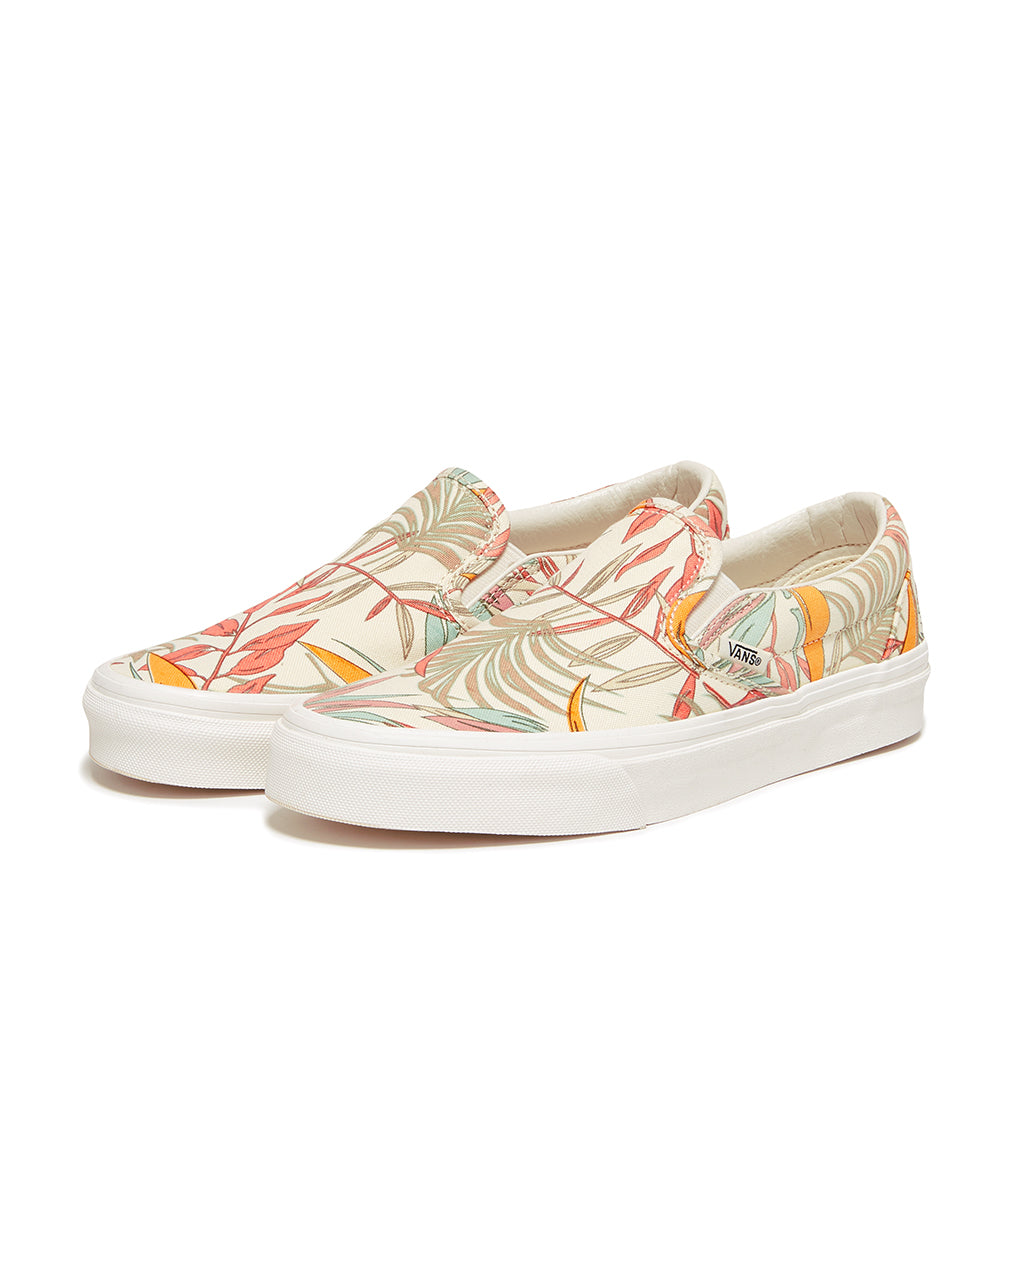 Classic Slip-On - California Floral by vans - shoes - ban.do